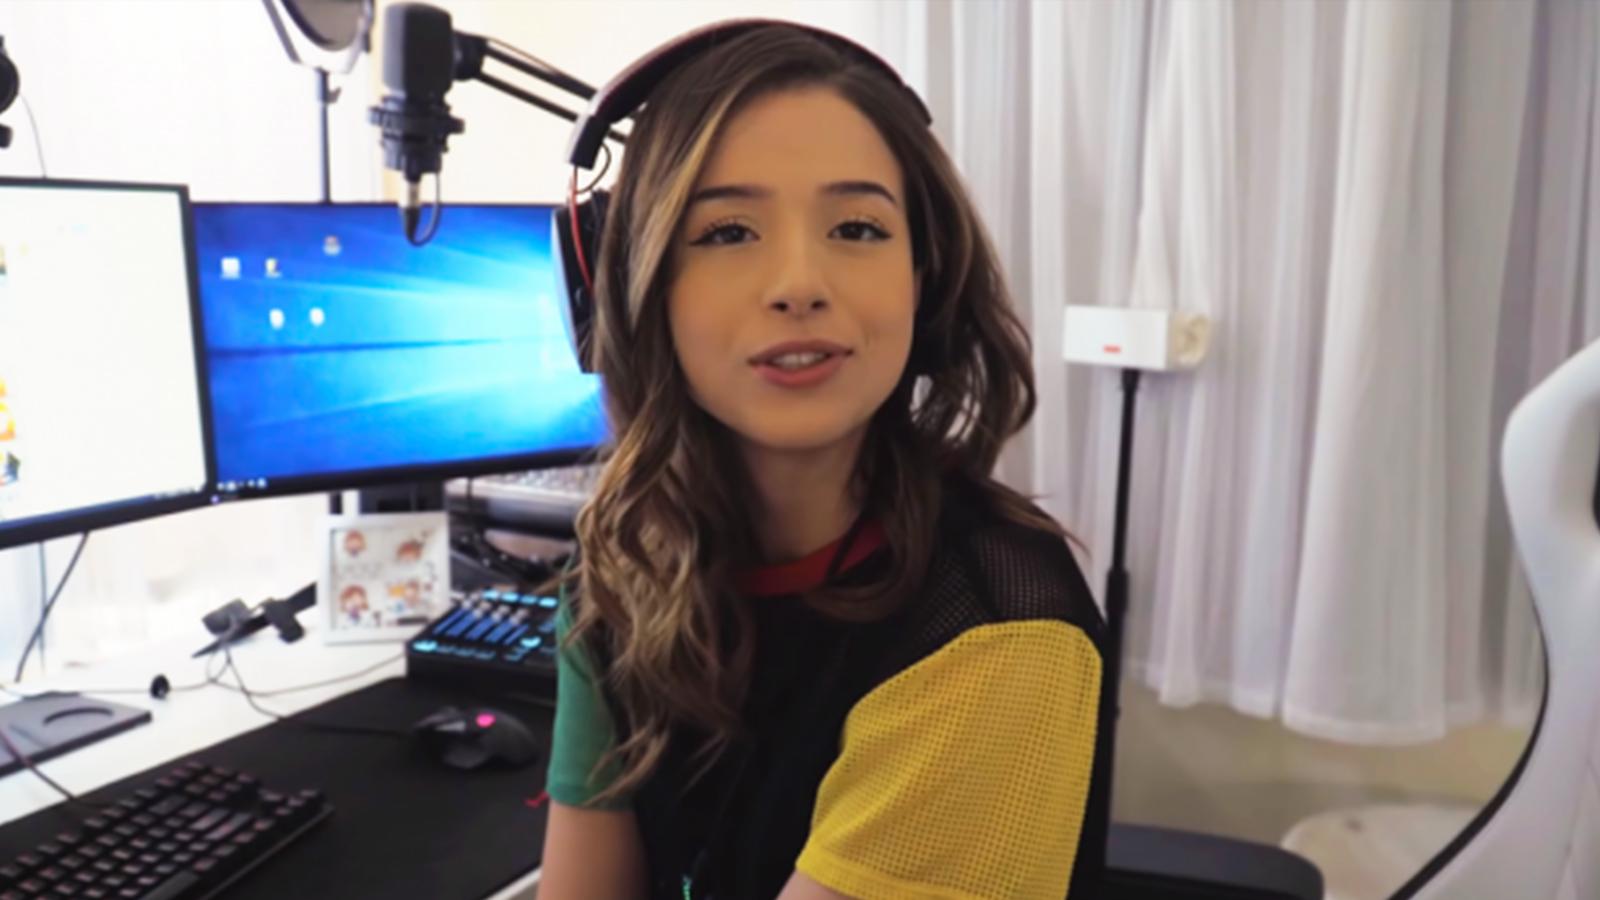 Pokimane filming a YouTube video.